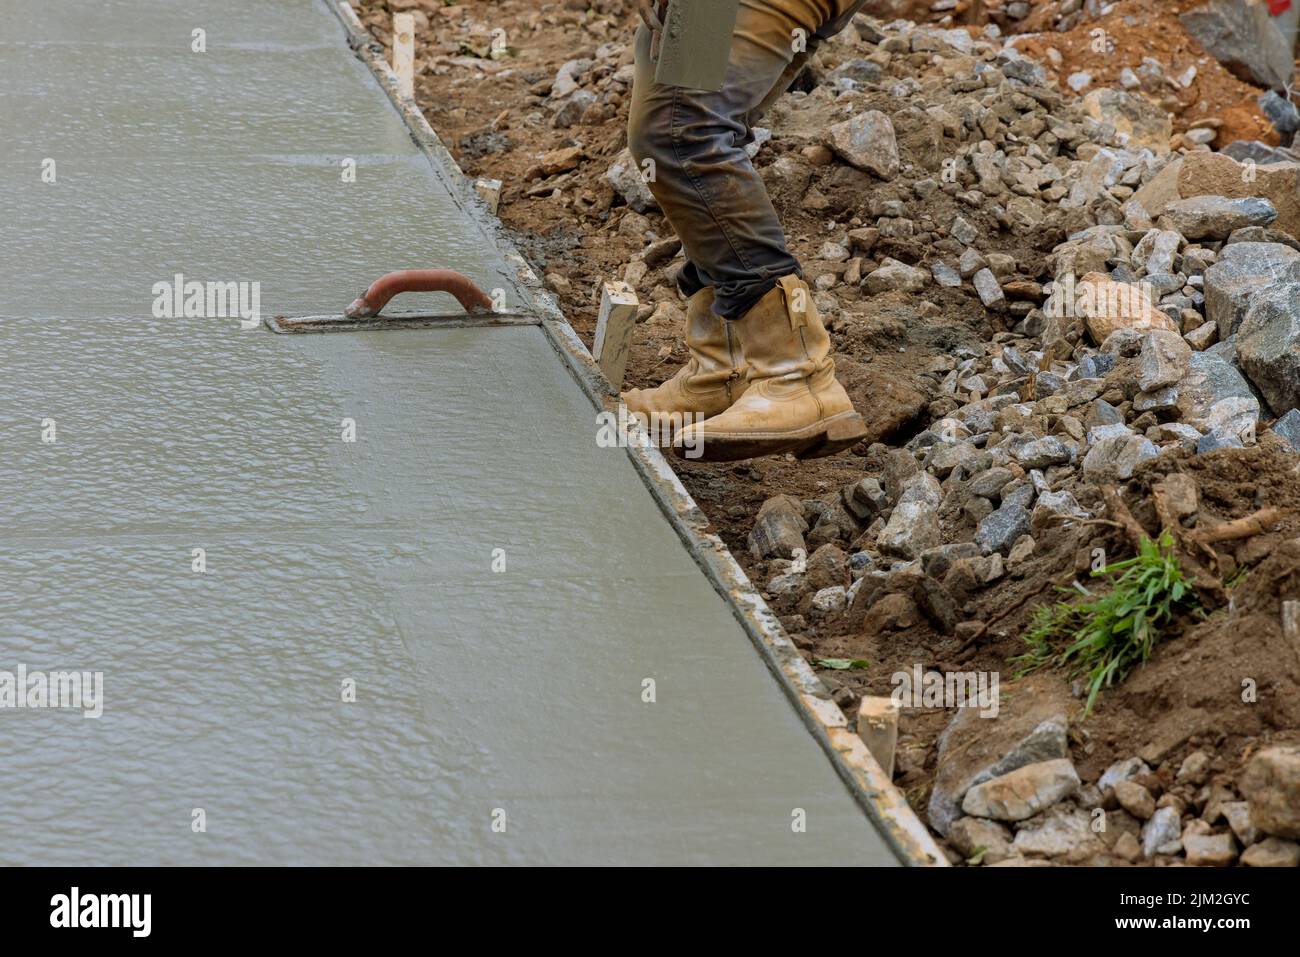 Worker is holding a steel trowel and smoothing plastering over freshly poured concrete that is wet Stock Photo